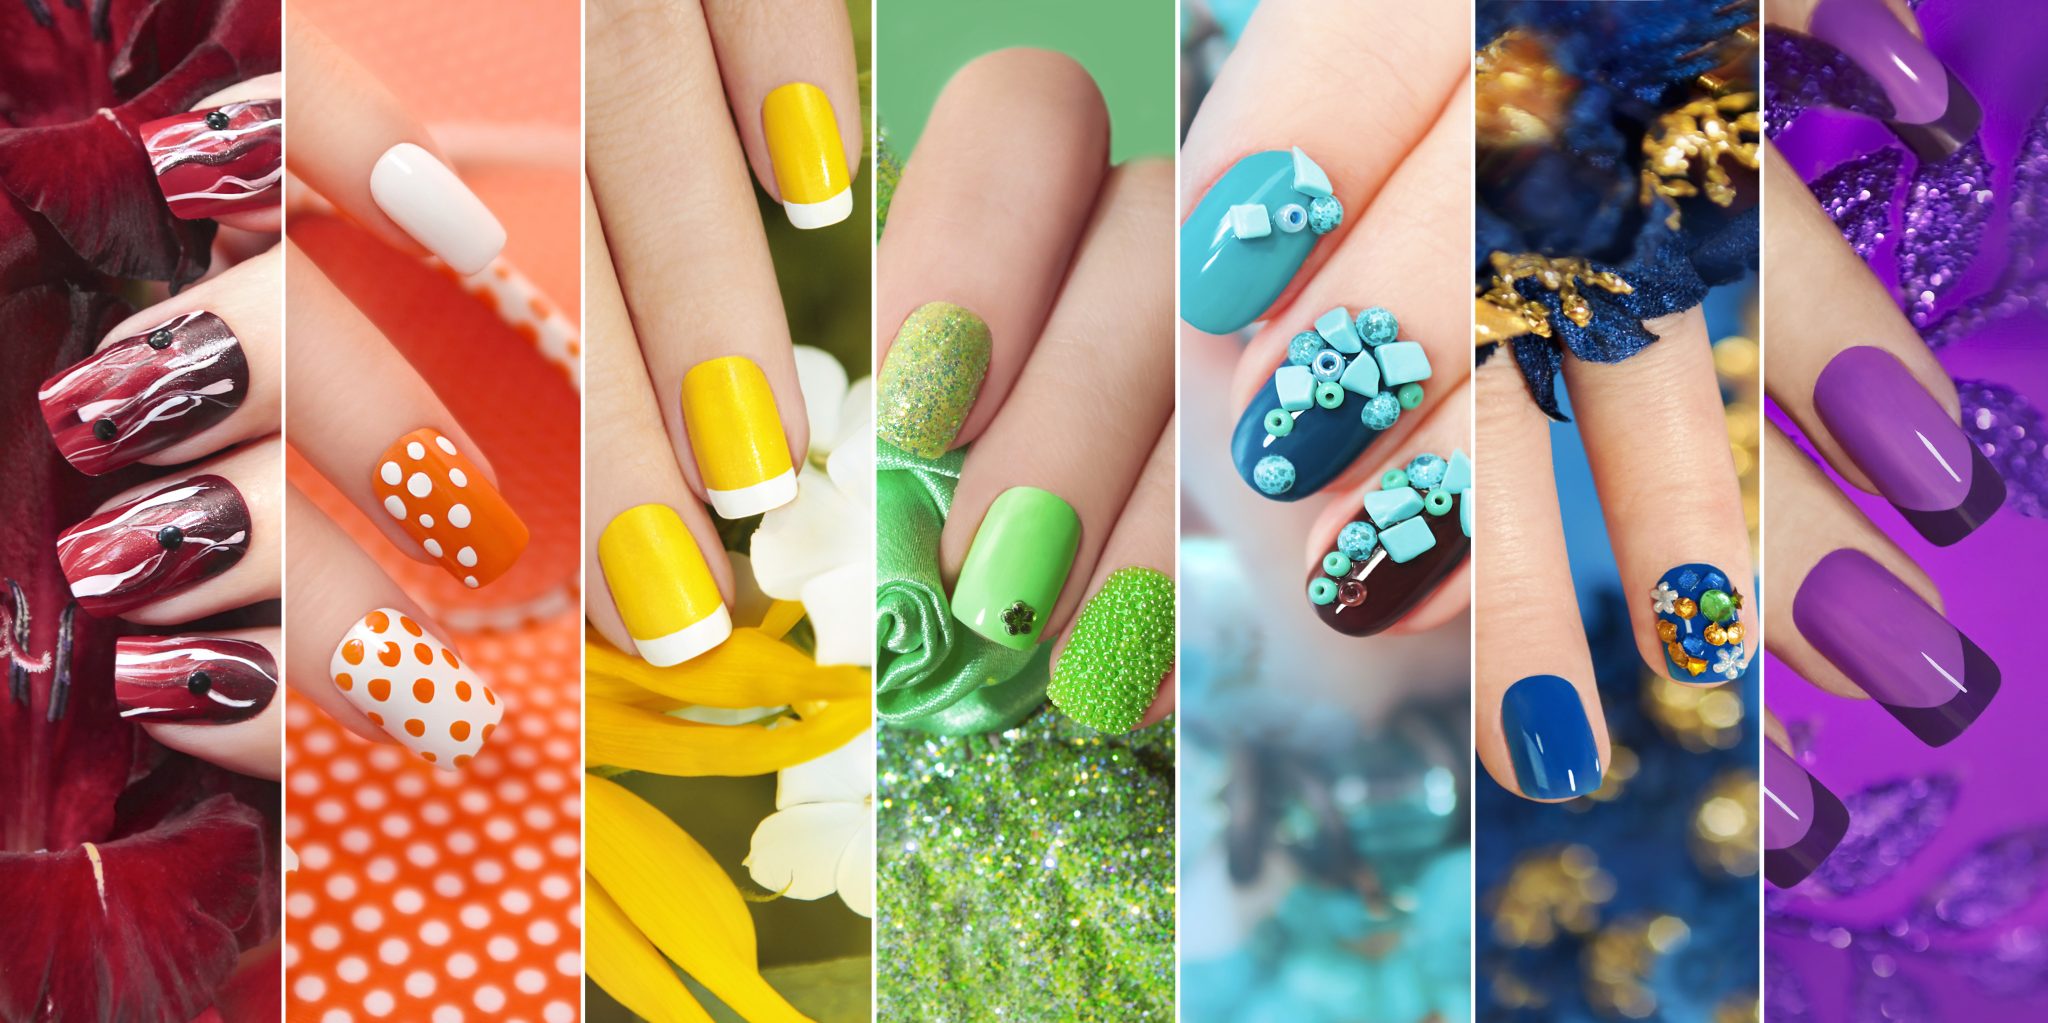 10. 60 Beautiful Nail Designs for Special Occasions - wide 3